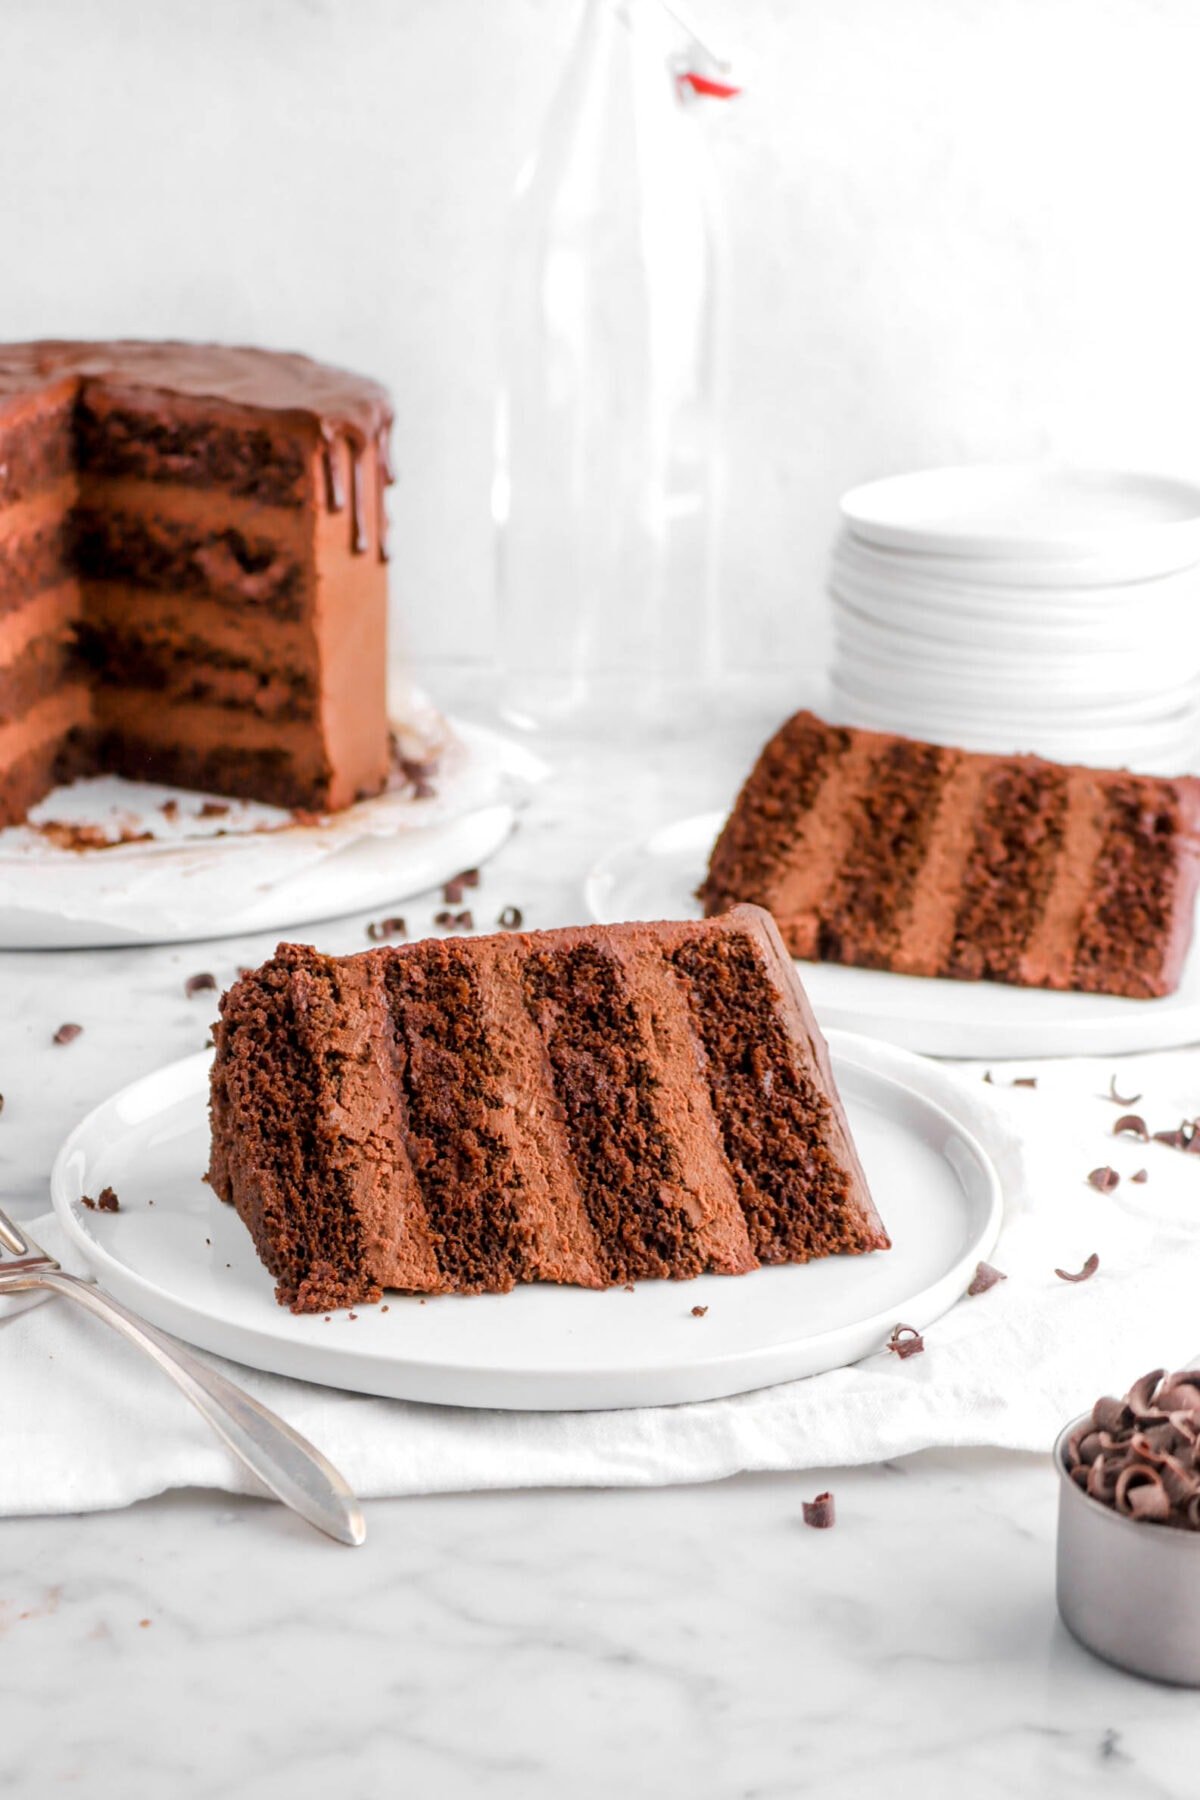 two slices of chocolate cake on white plates with cake behind